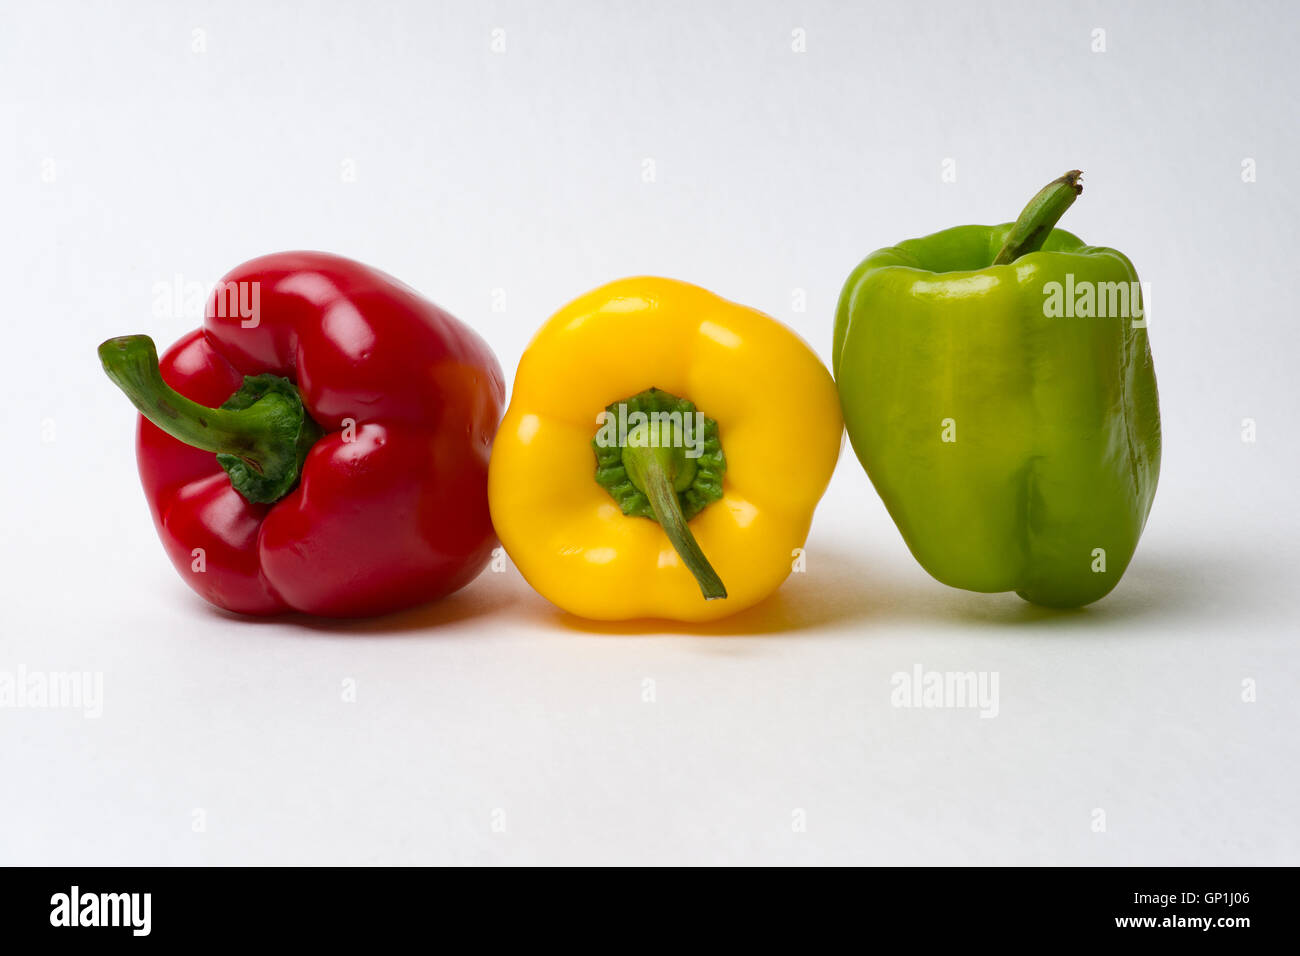 Bell peppers traffic lights. This is the red light which commands - Go! Prints and gifts for fun and good mood Stock Photo